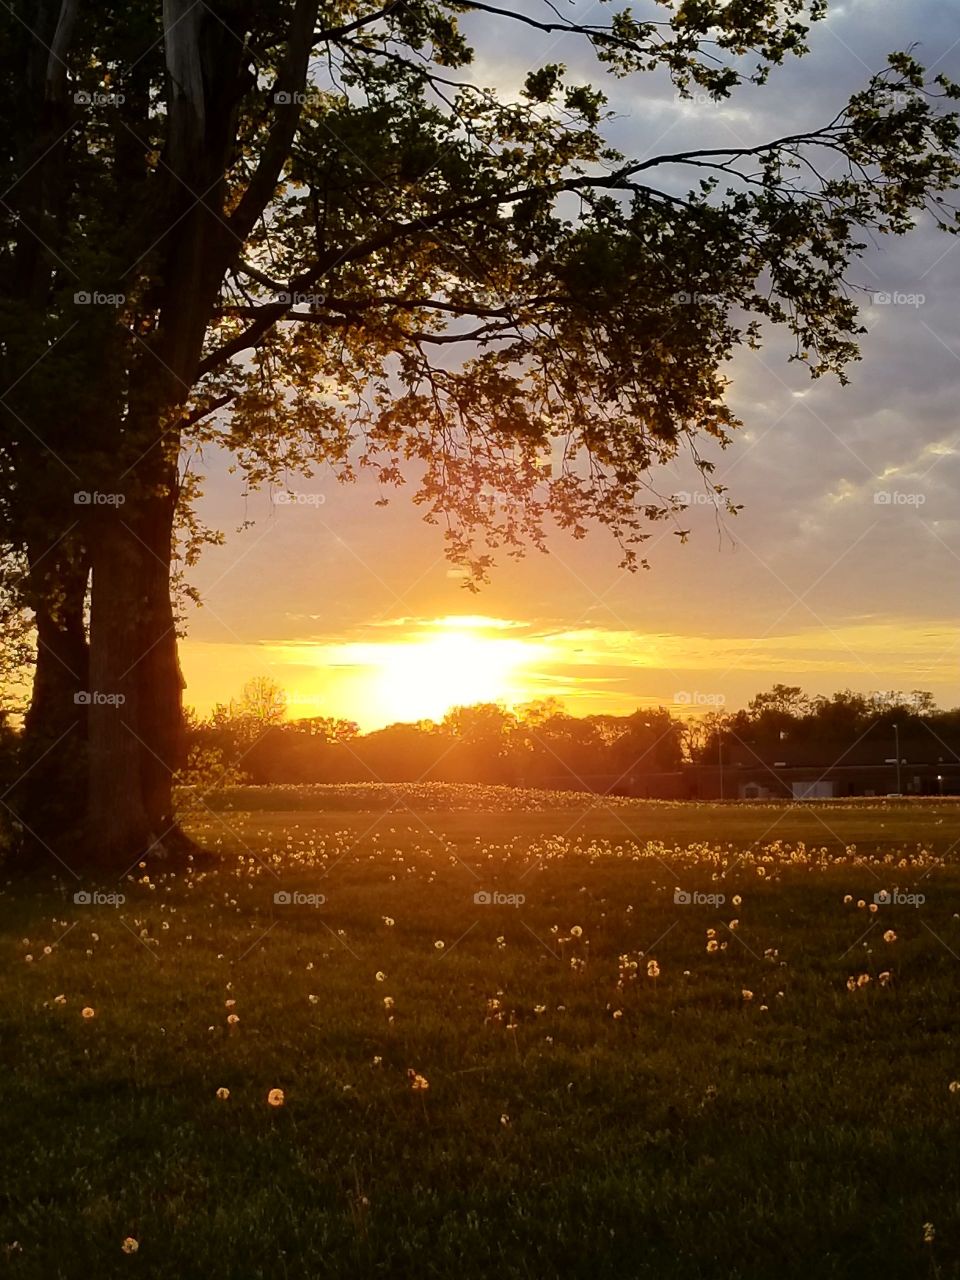 Sunset over a field of Dandelions